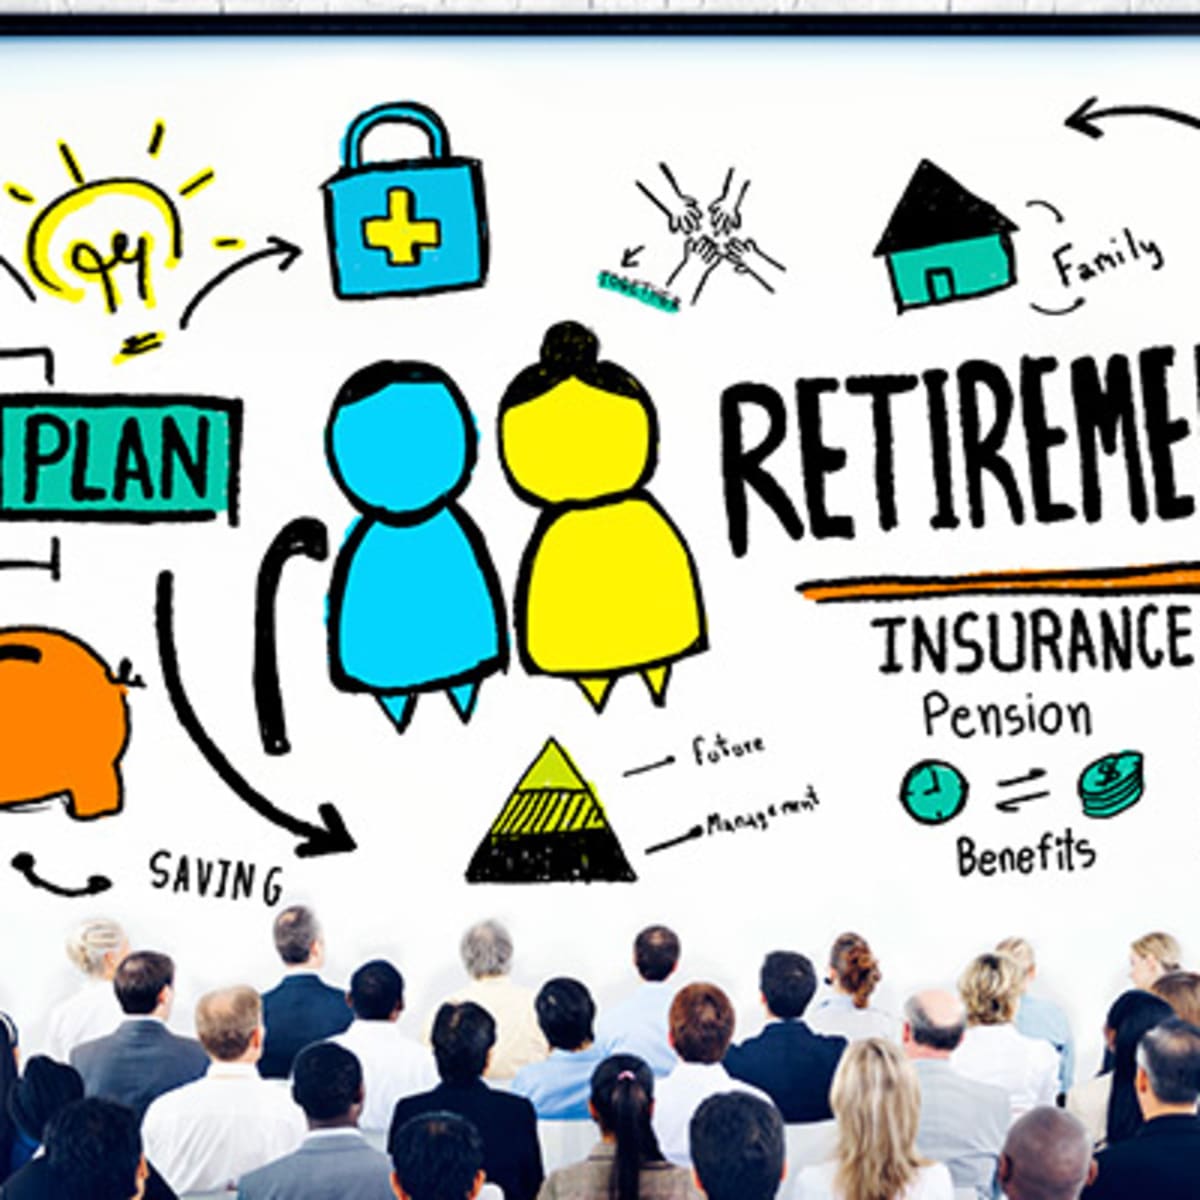 7 Steps For Planning Your Retirement - Thestreet